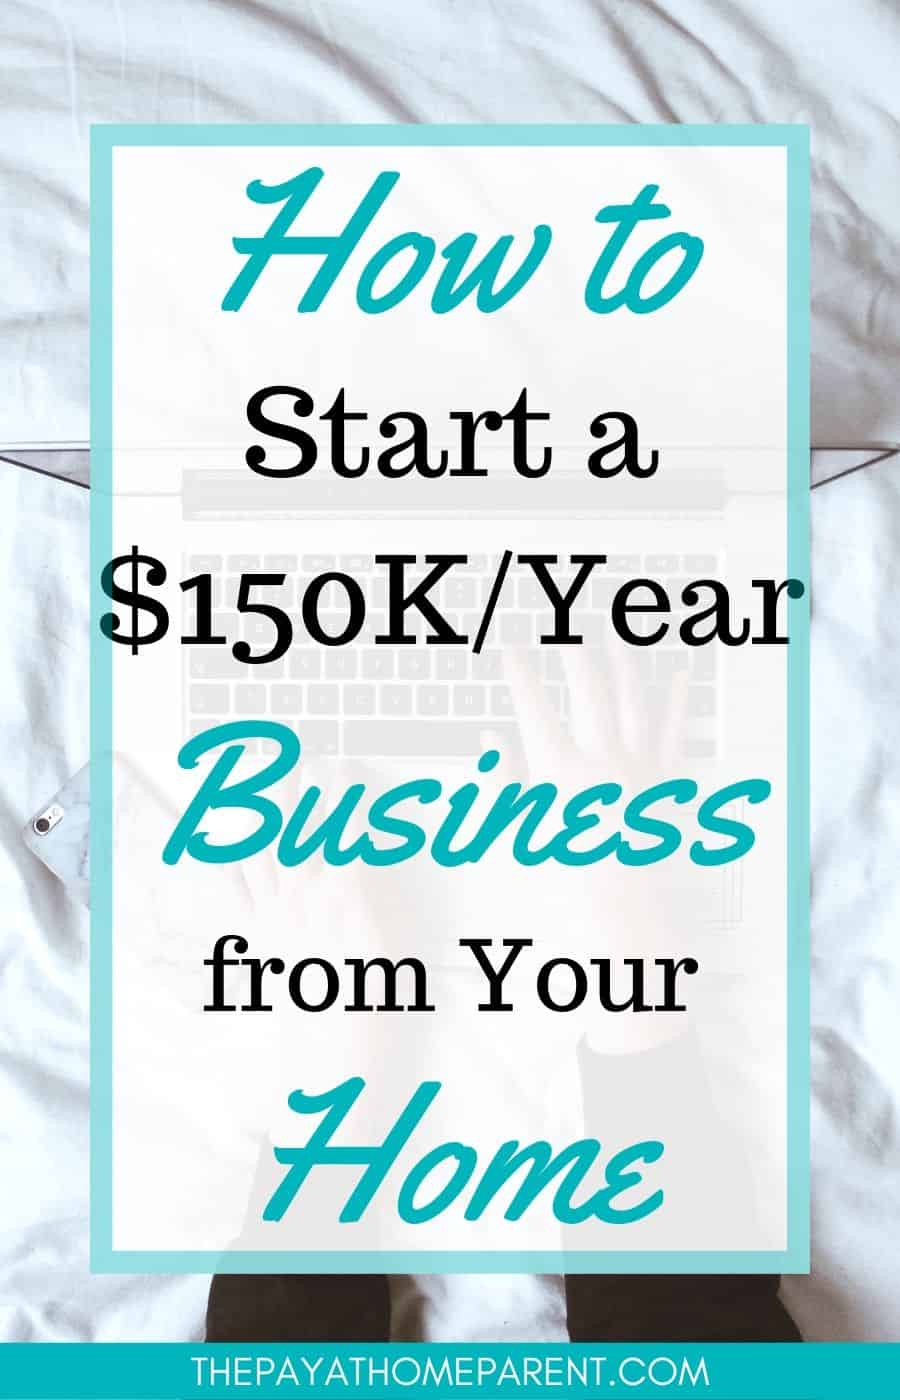 115 Ideas For A Home Based Business That Pay Up To $150,000/Year